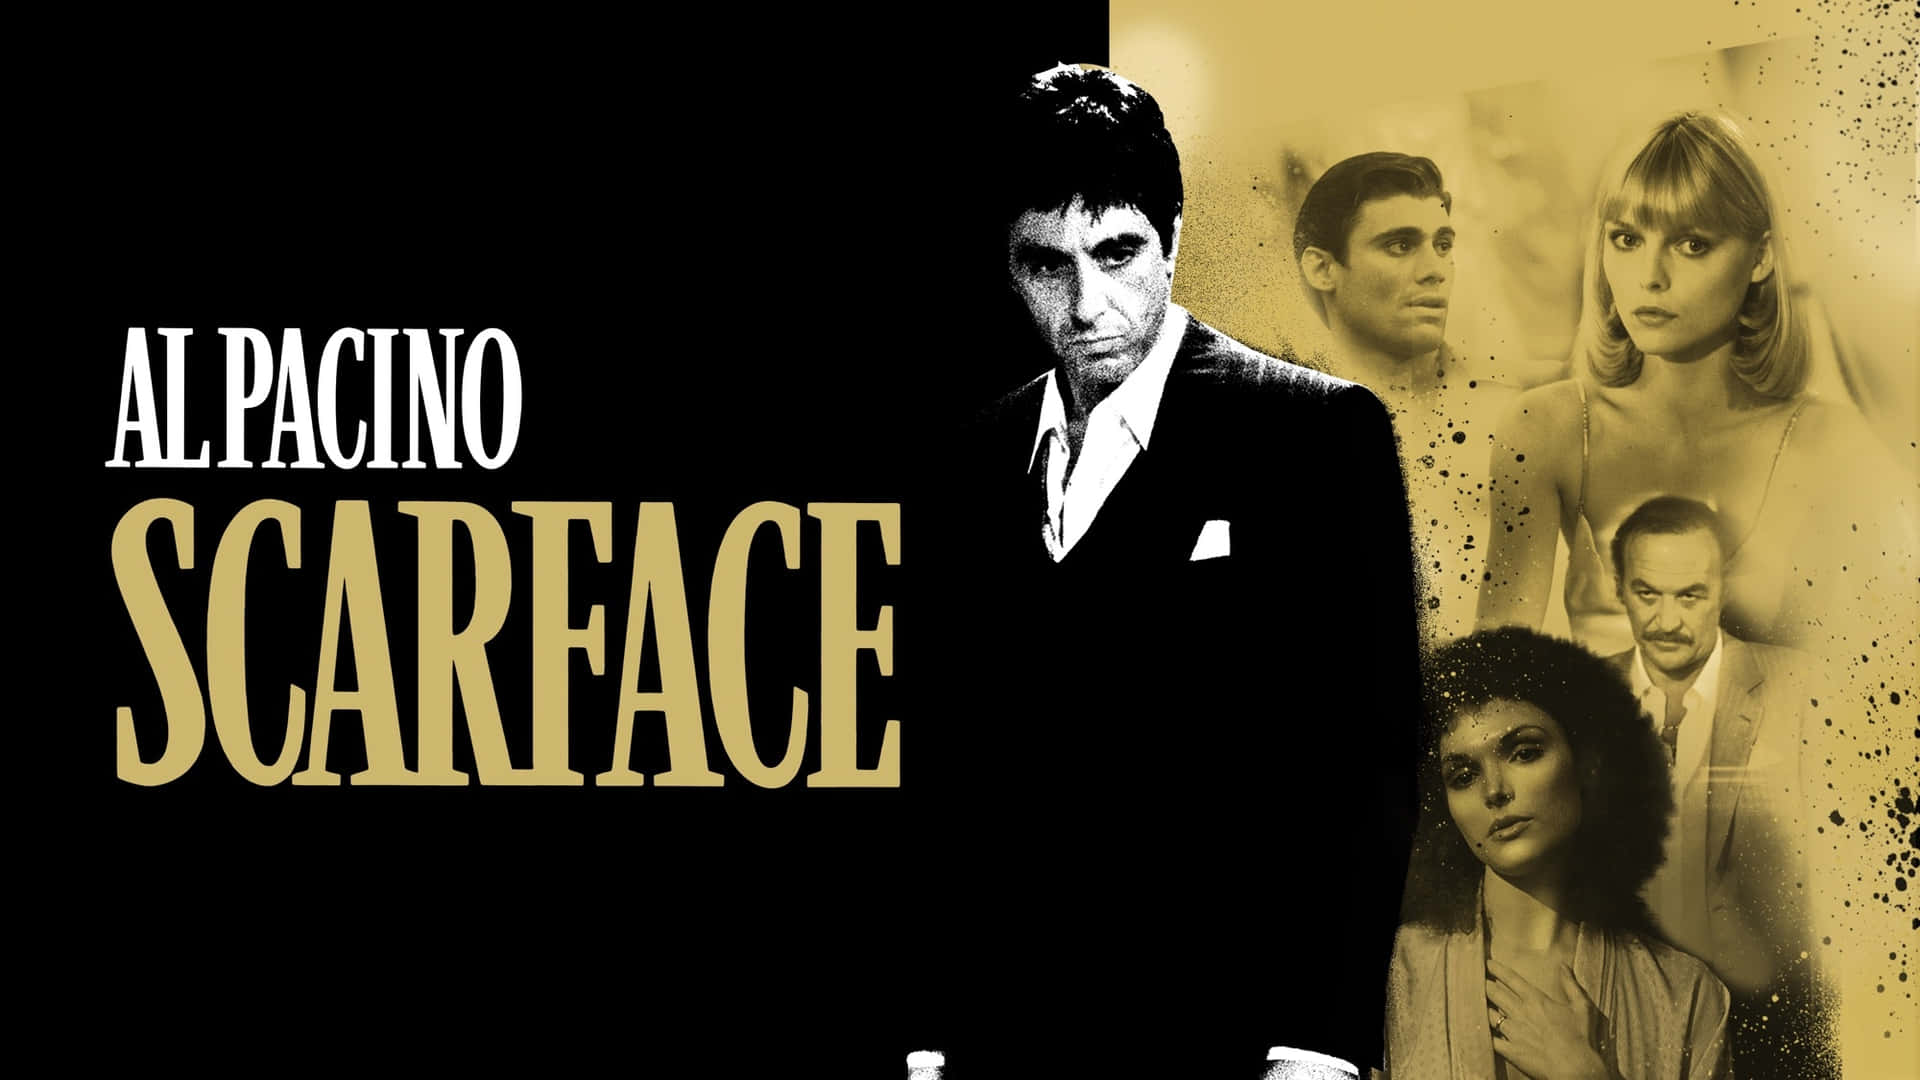 Tony Montana - The Epitome Of Courage And Ambition